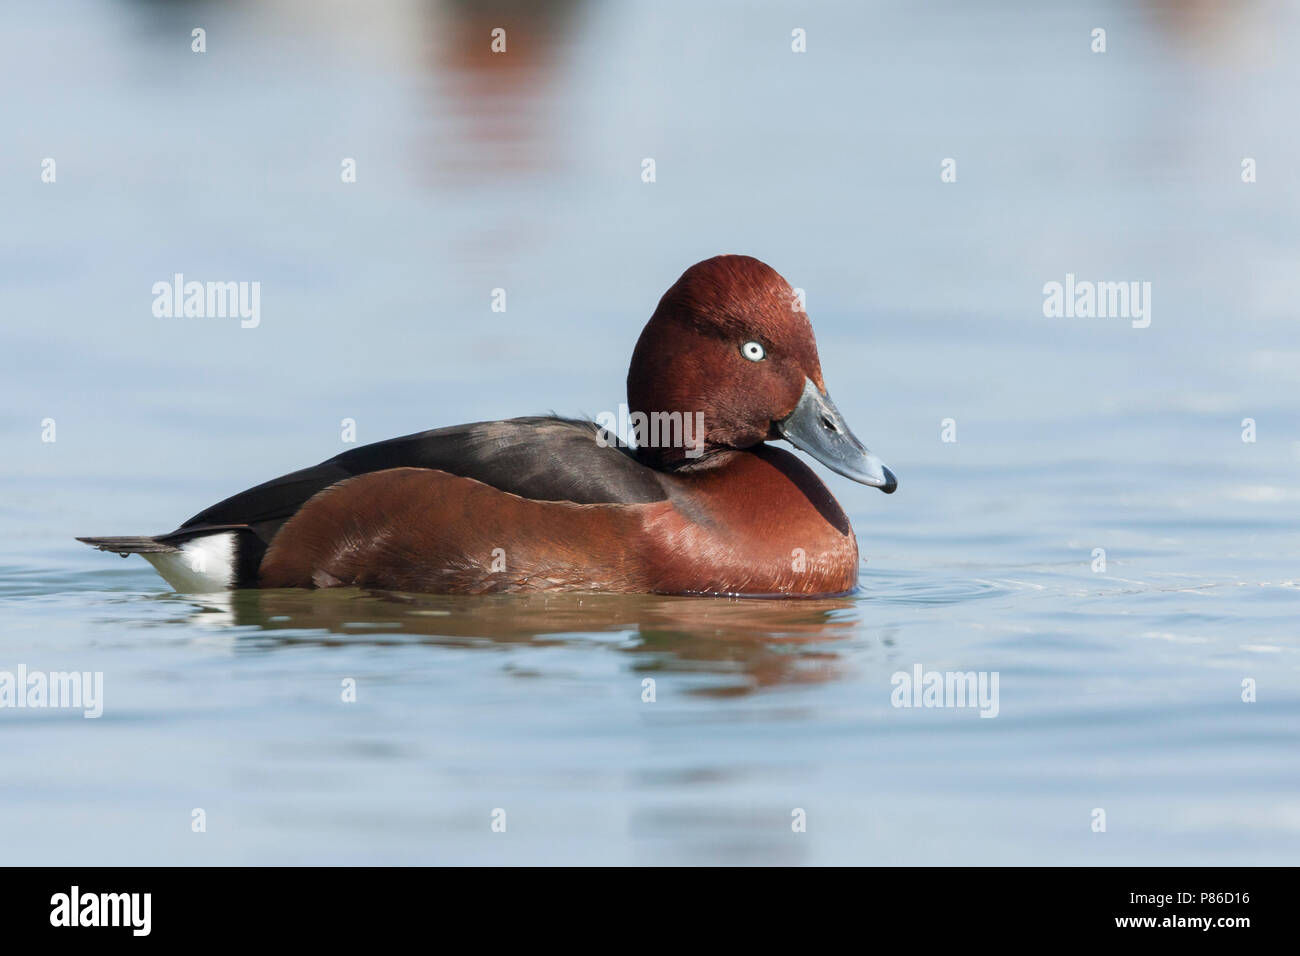 Ferruginous Duck, Witoogeend, Aythya nyroca, France, adult male Stock Photo